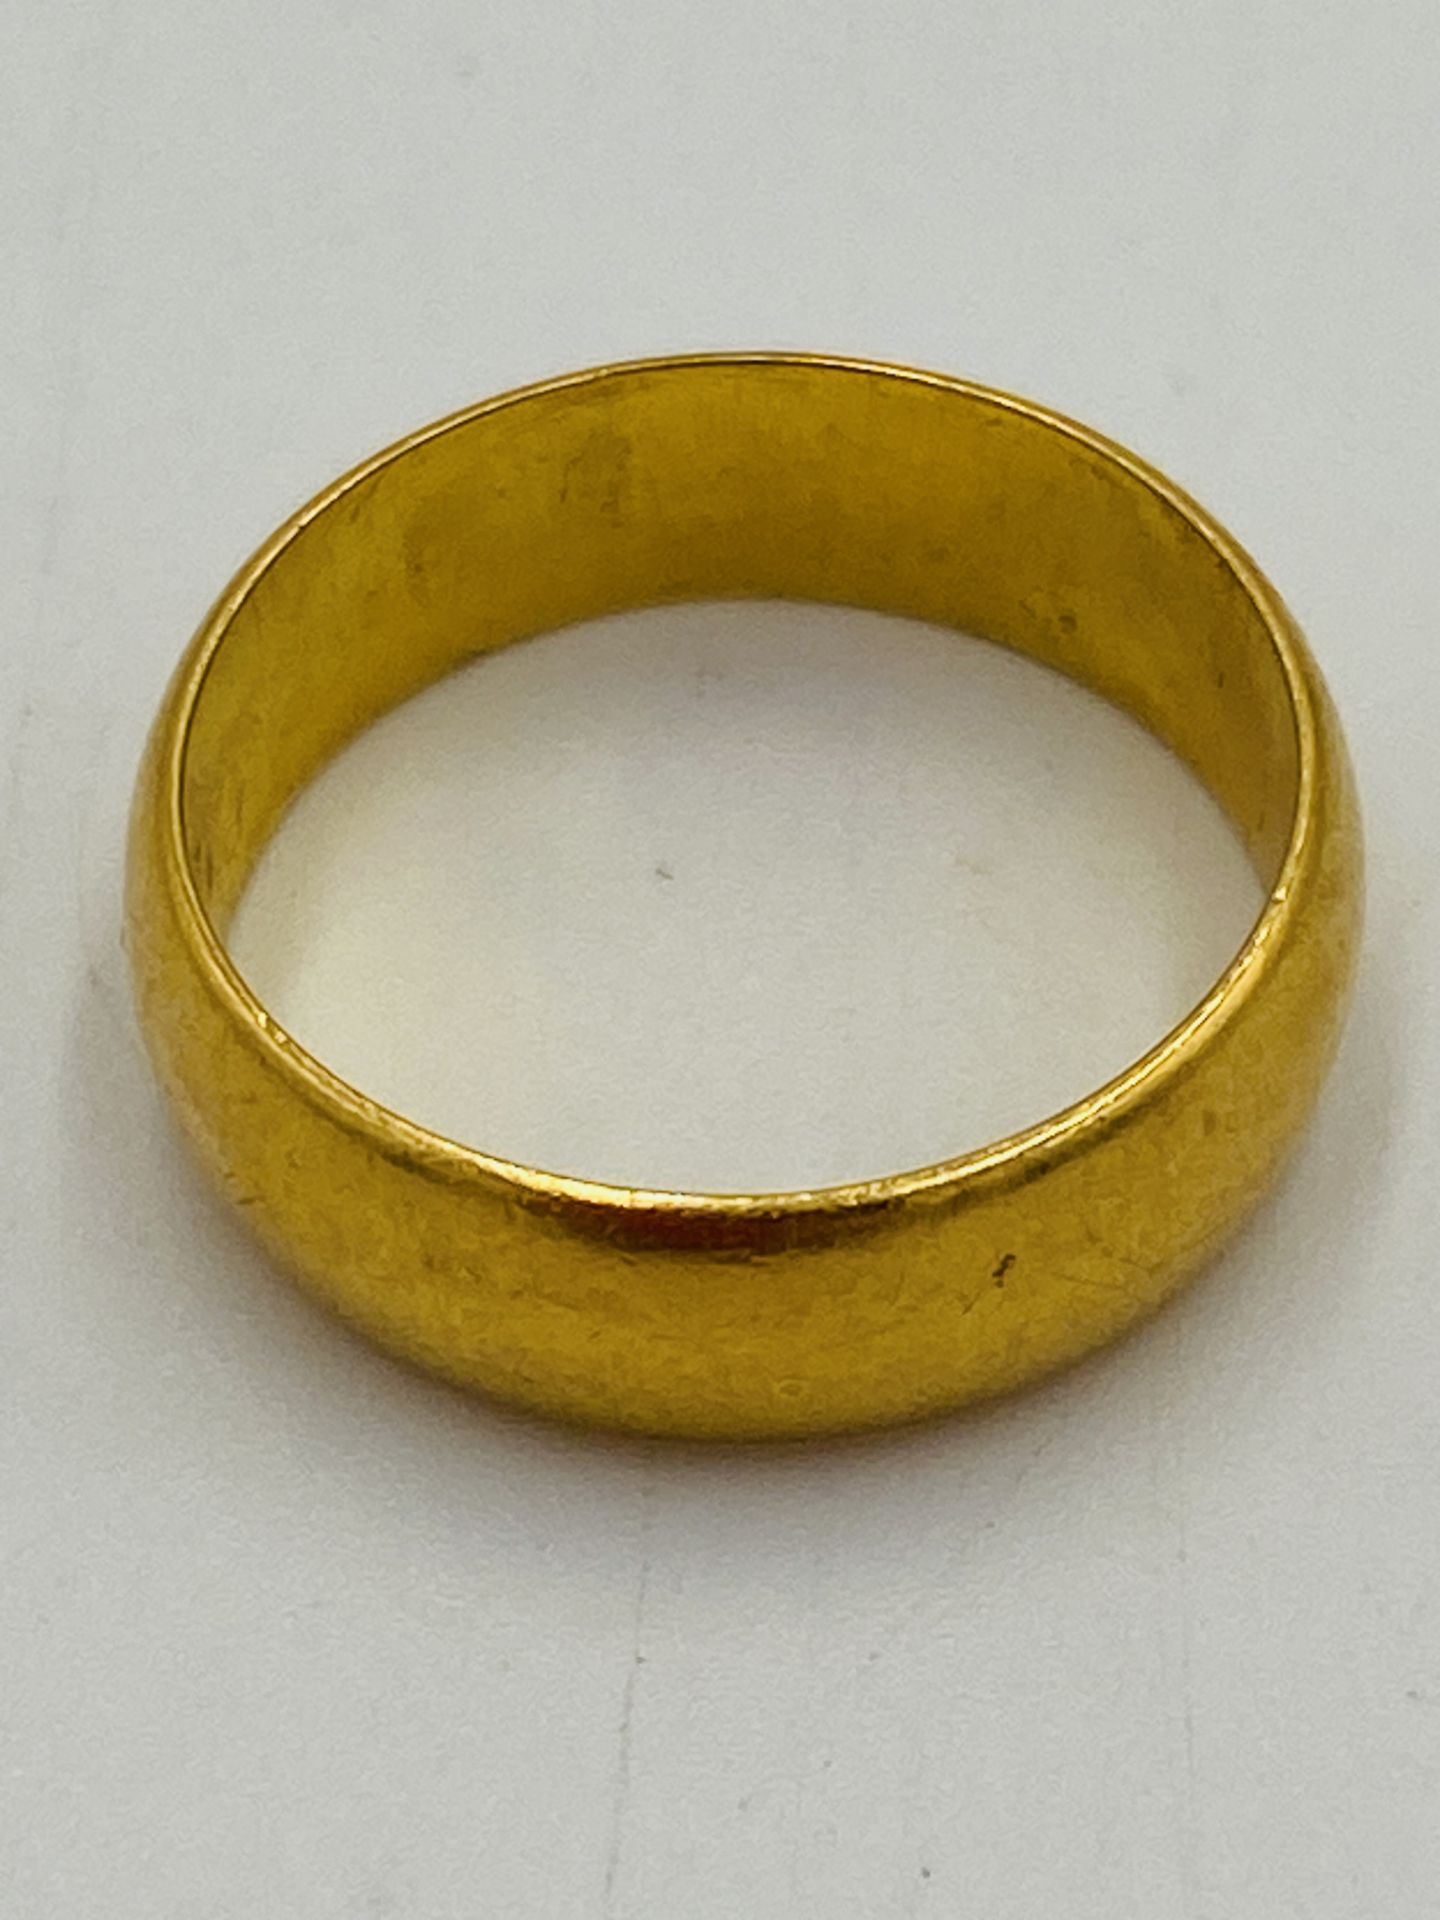 22ct gold band - Image 4 of 4